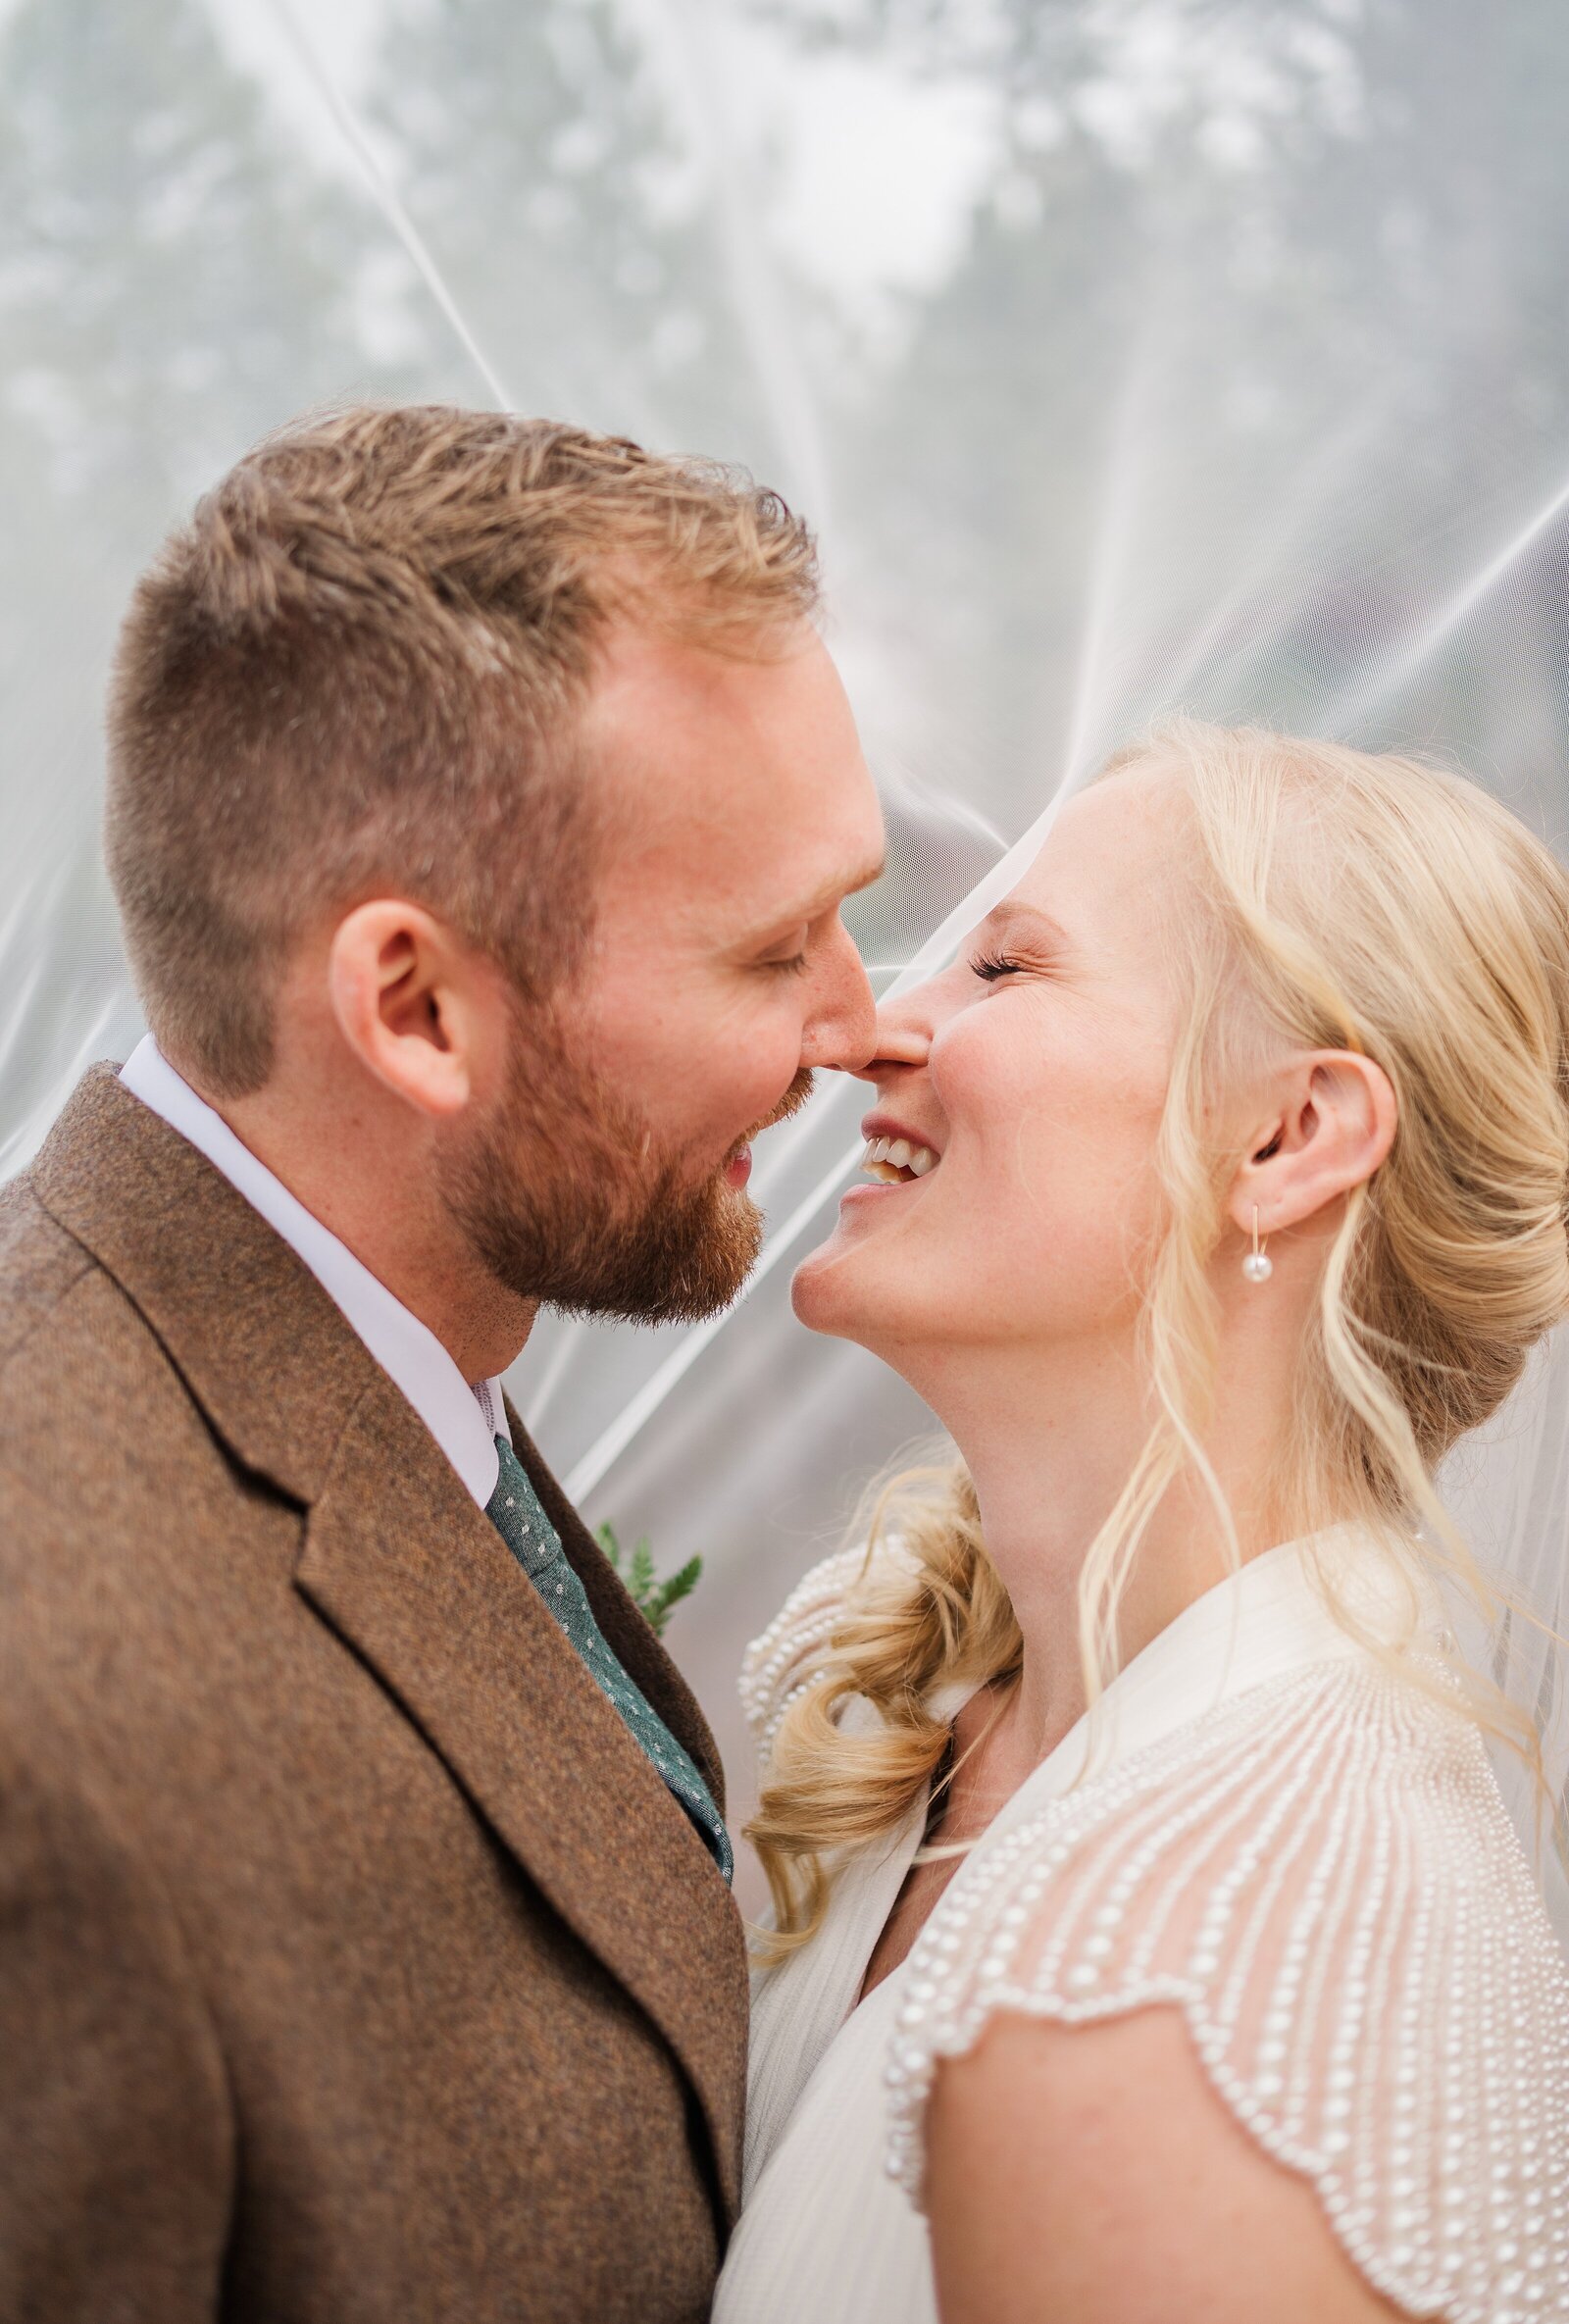 Let Sam Immer Photography capture the stunning beauty of Colorado's natural landscapes in your engagement, proposal, or anniversary photos. Our natural light approach and creative eye will showcase your love in its most beautiful form.